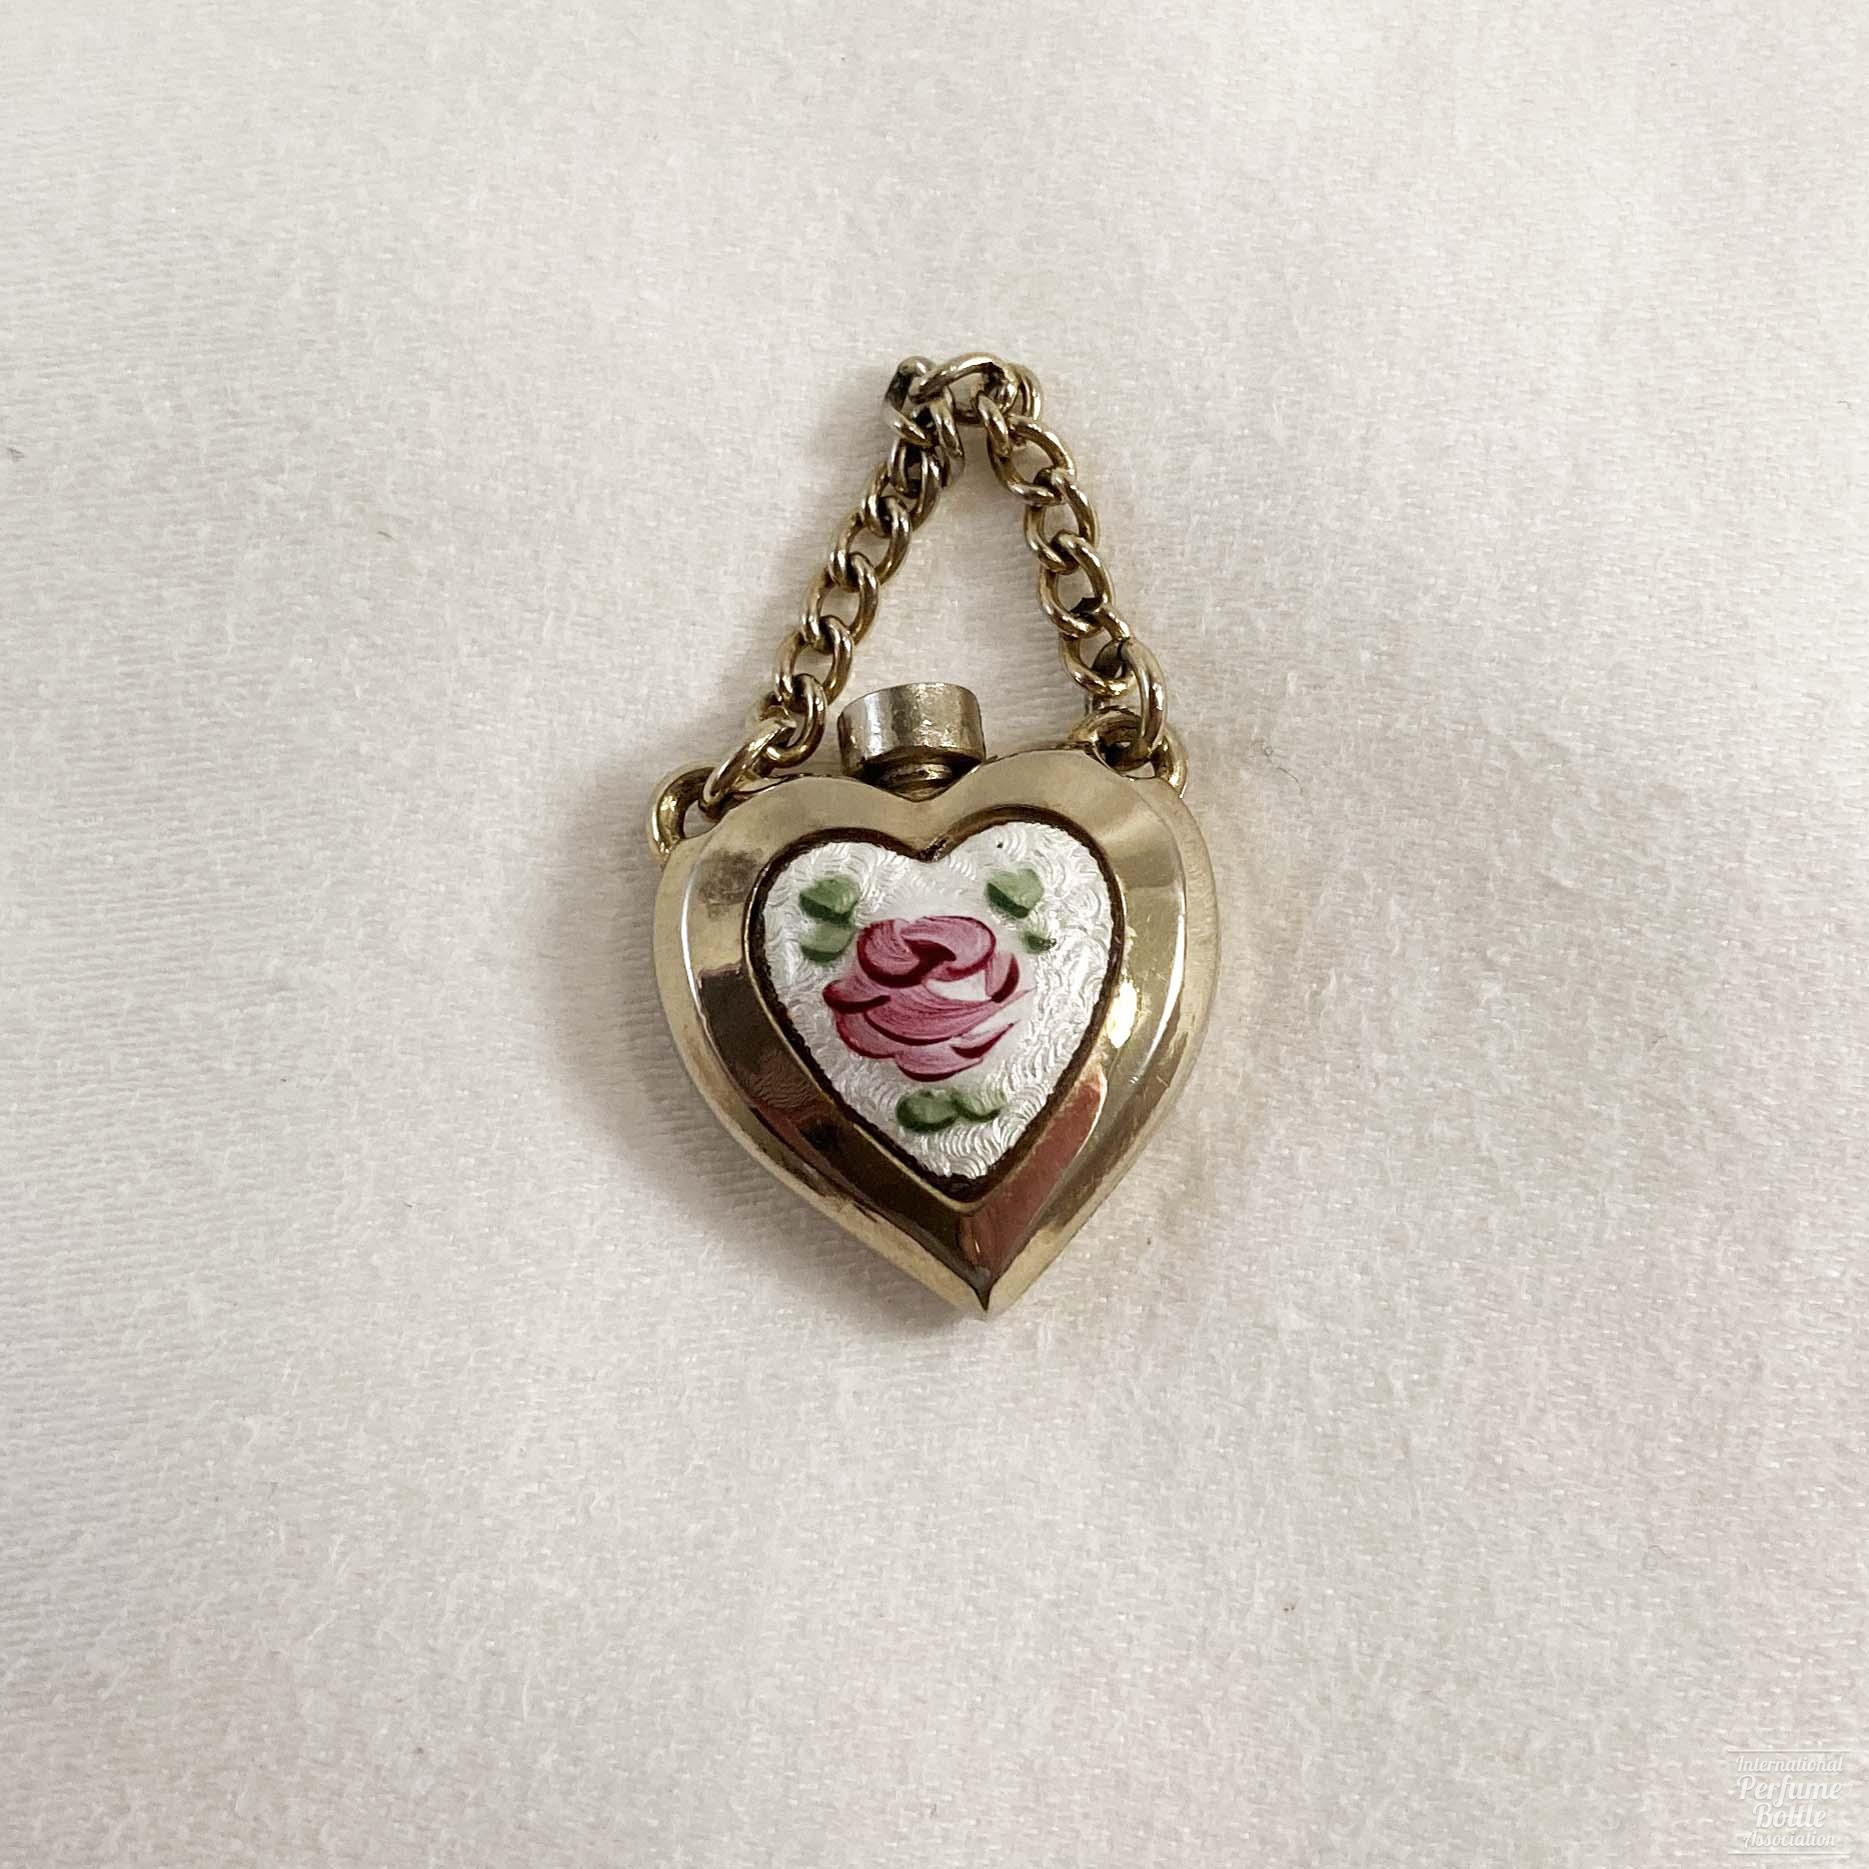 Heart-Shaped Stainless Steel Amulet With Pink Guilloché Rose